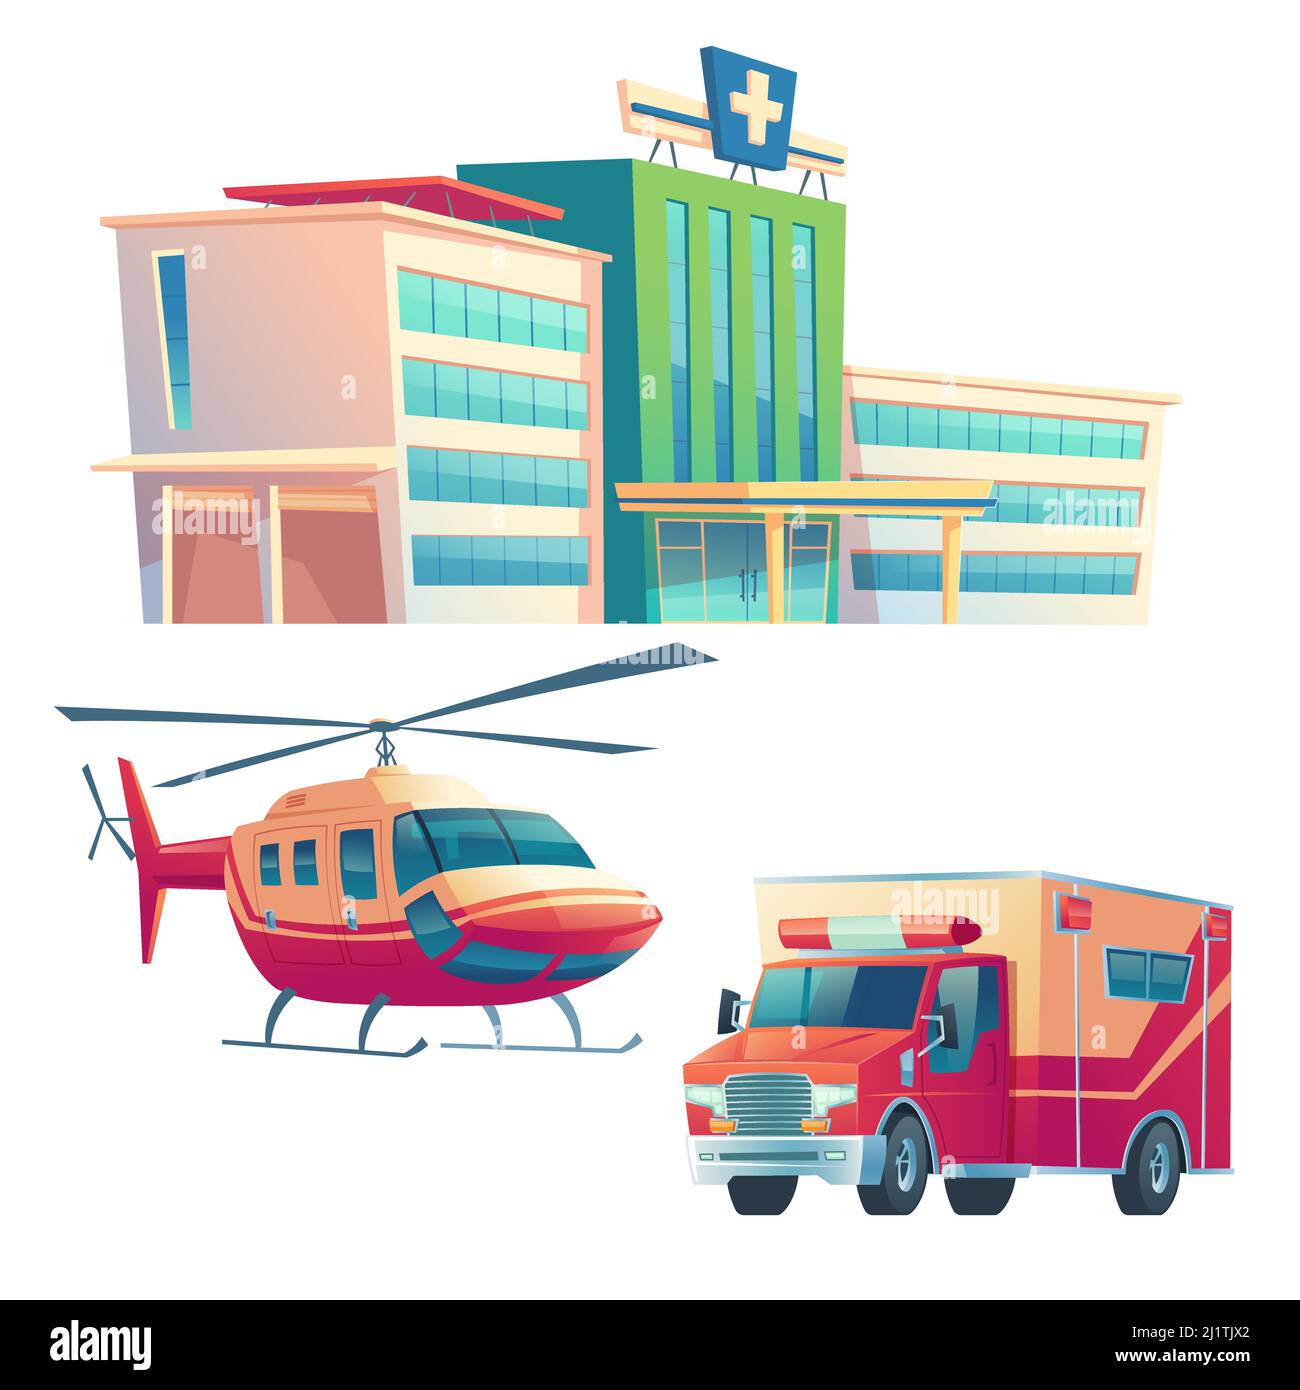 Hospital building, ambulance car and helicopter isolated on white background. Vector cartoon illustration of medical clinic, urgent first aid service, Stock Vector